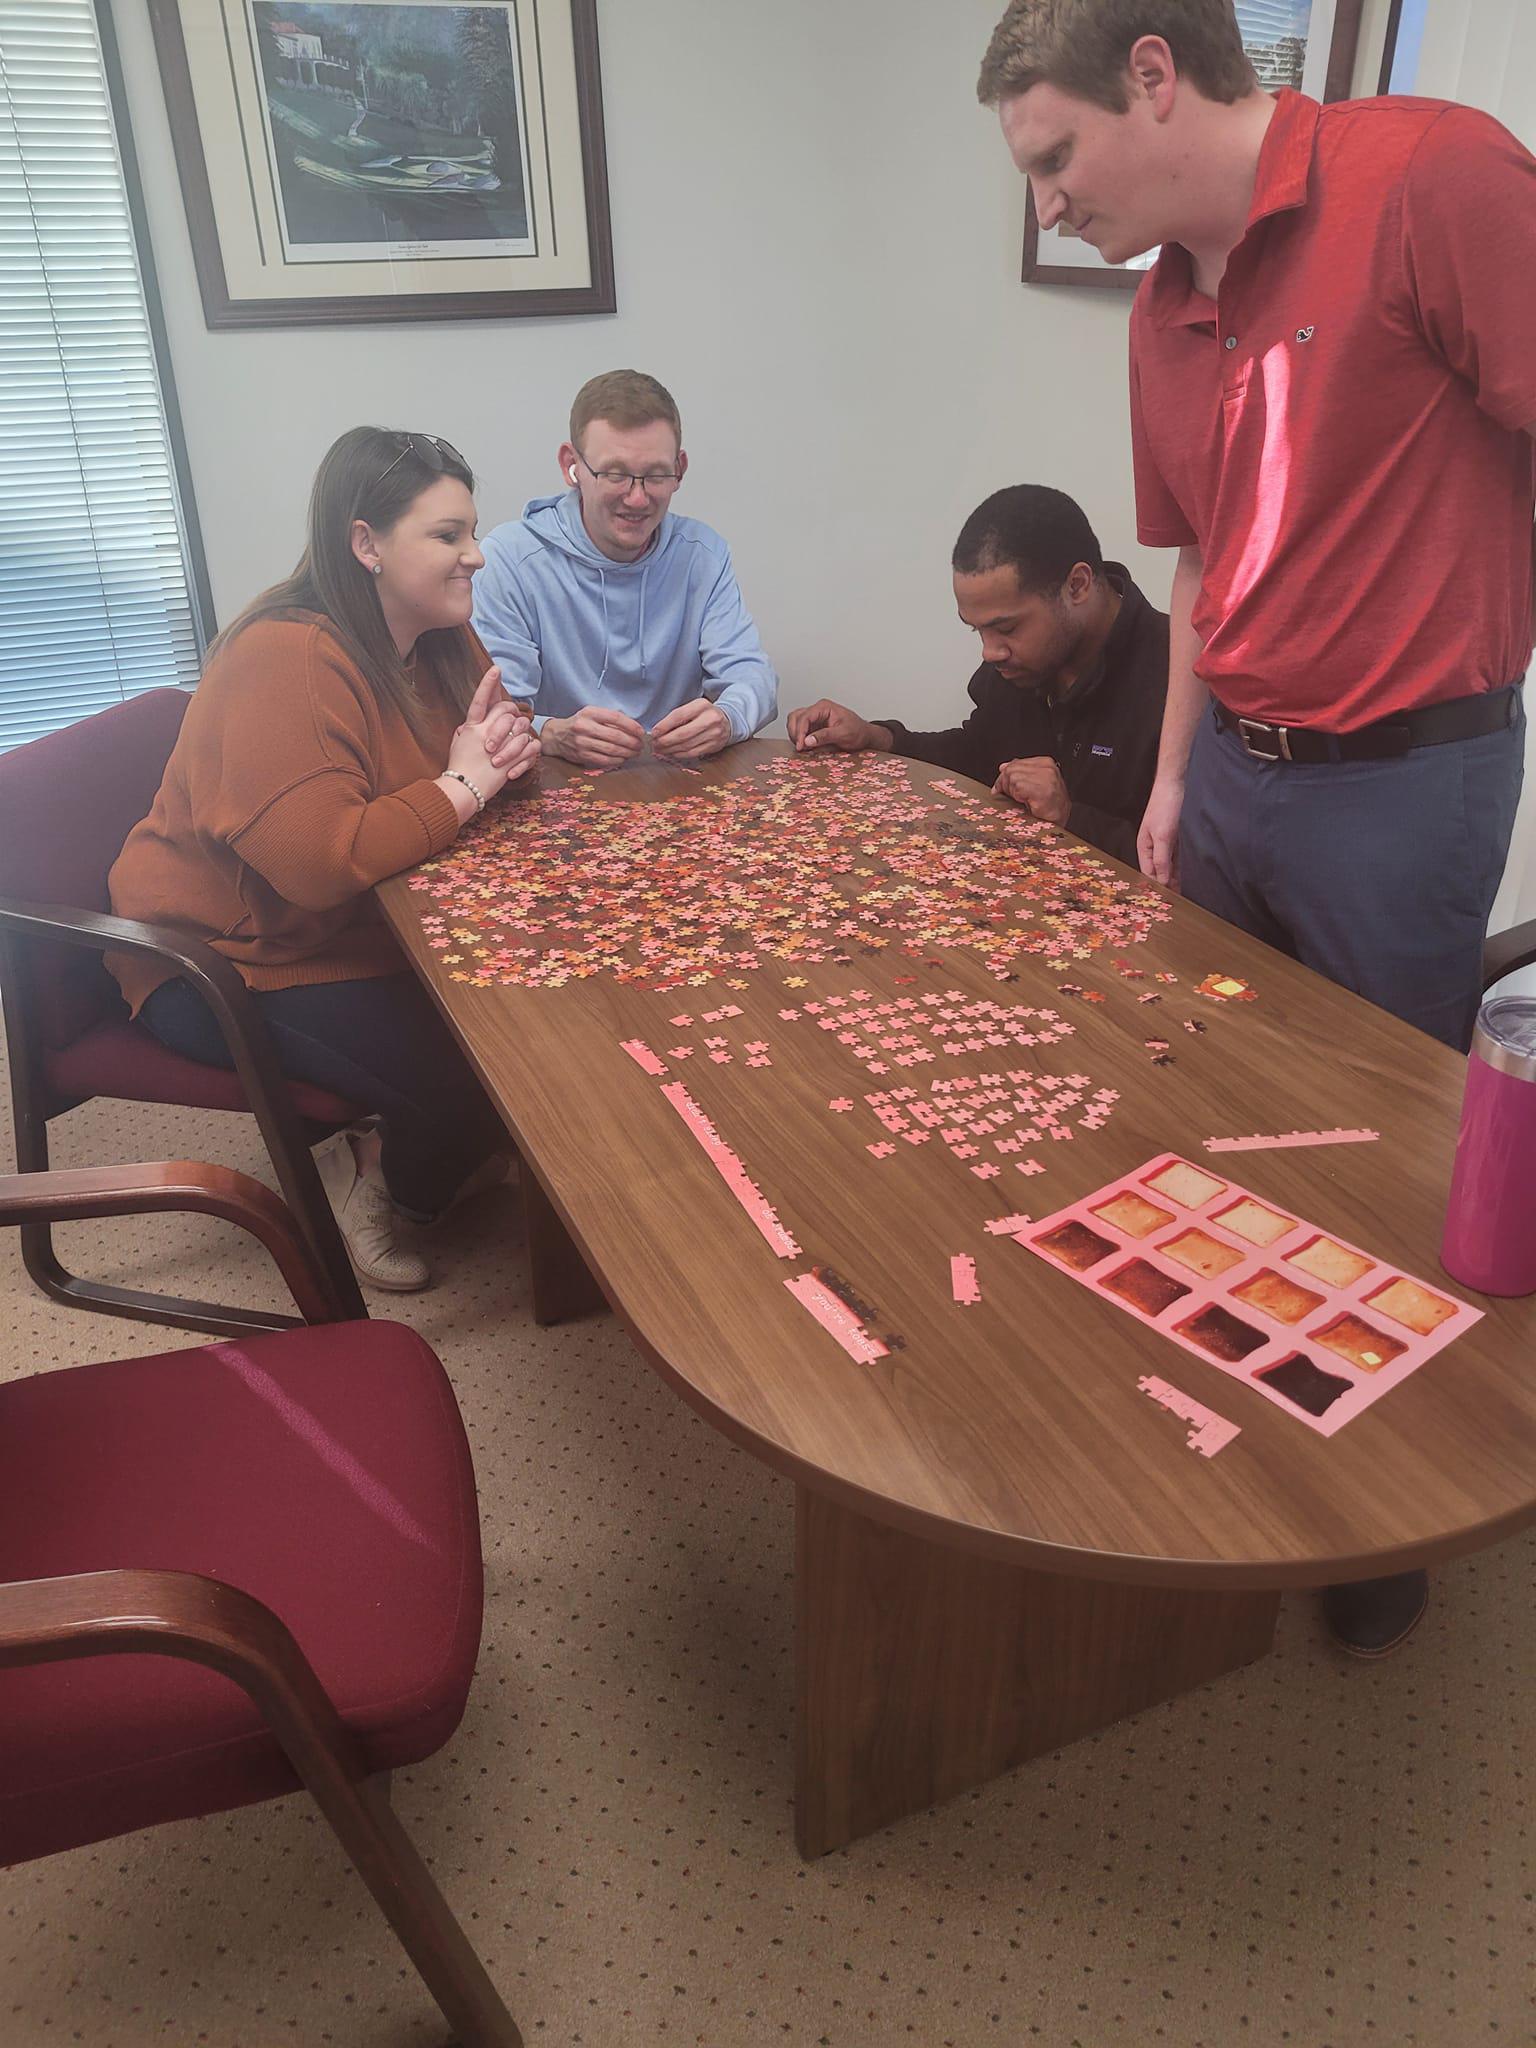 Puzzle break in the office today!